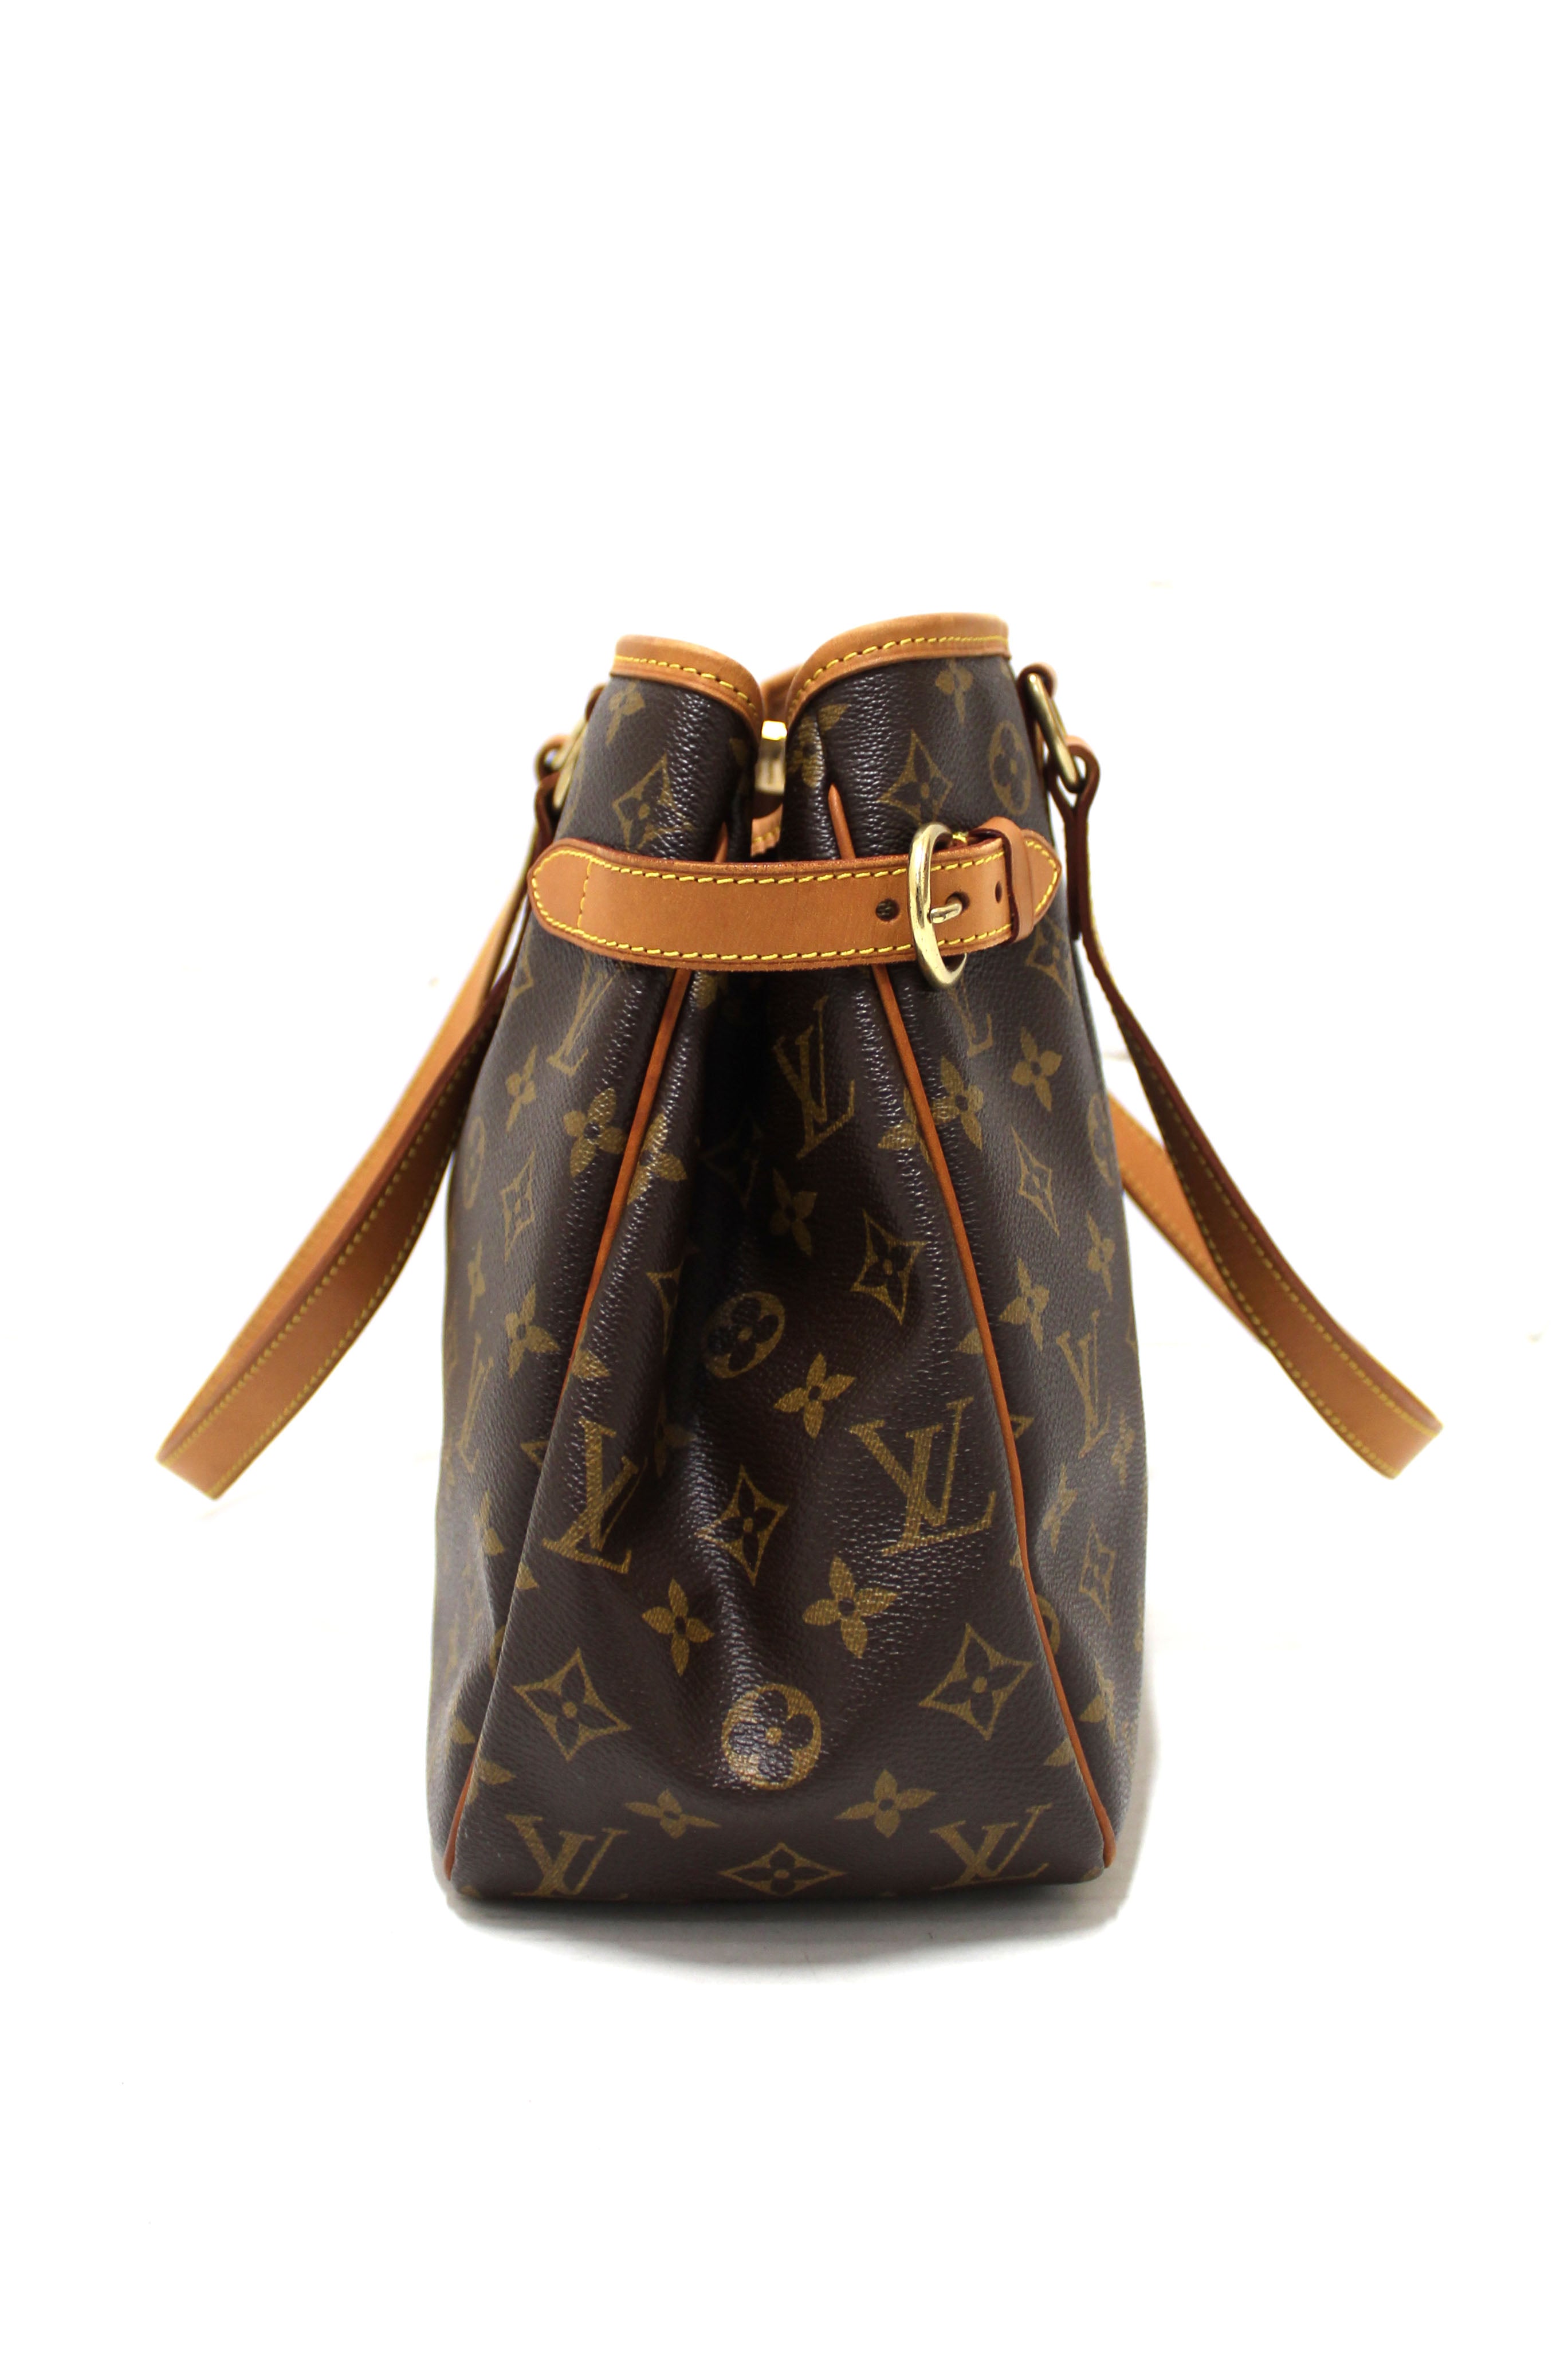 Shop for Louis Vuitton Monogram Canvas Leather Batignolles Vertical PM Bag  - Shipped from USA